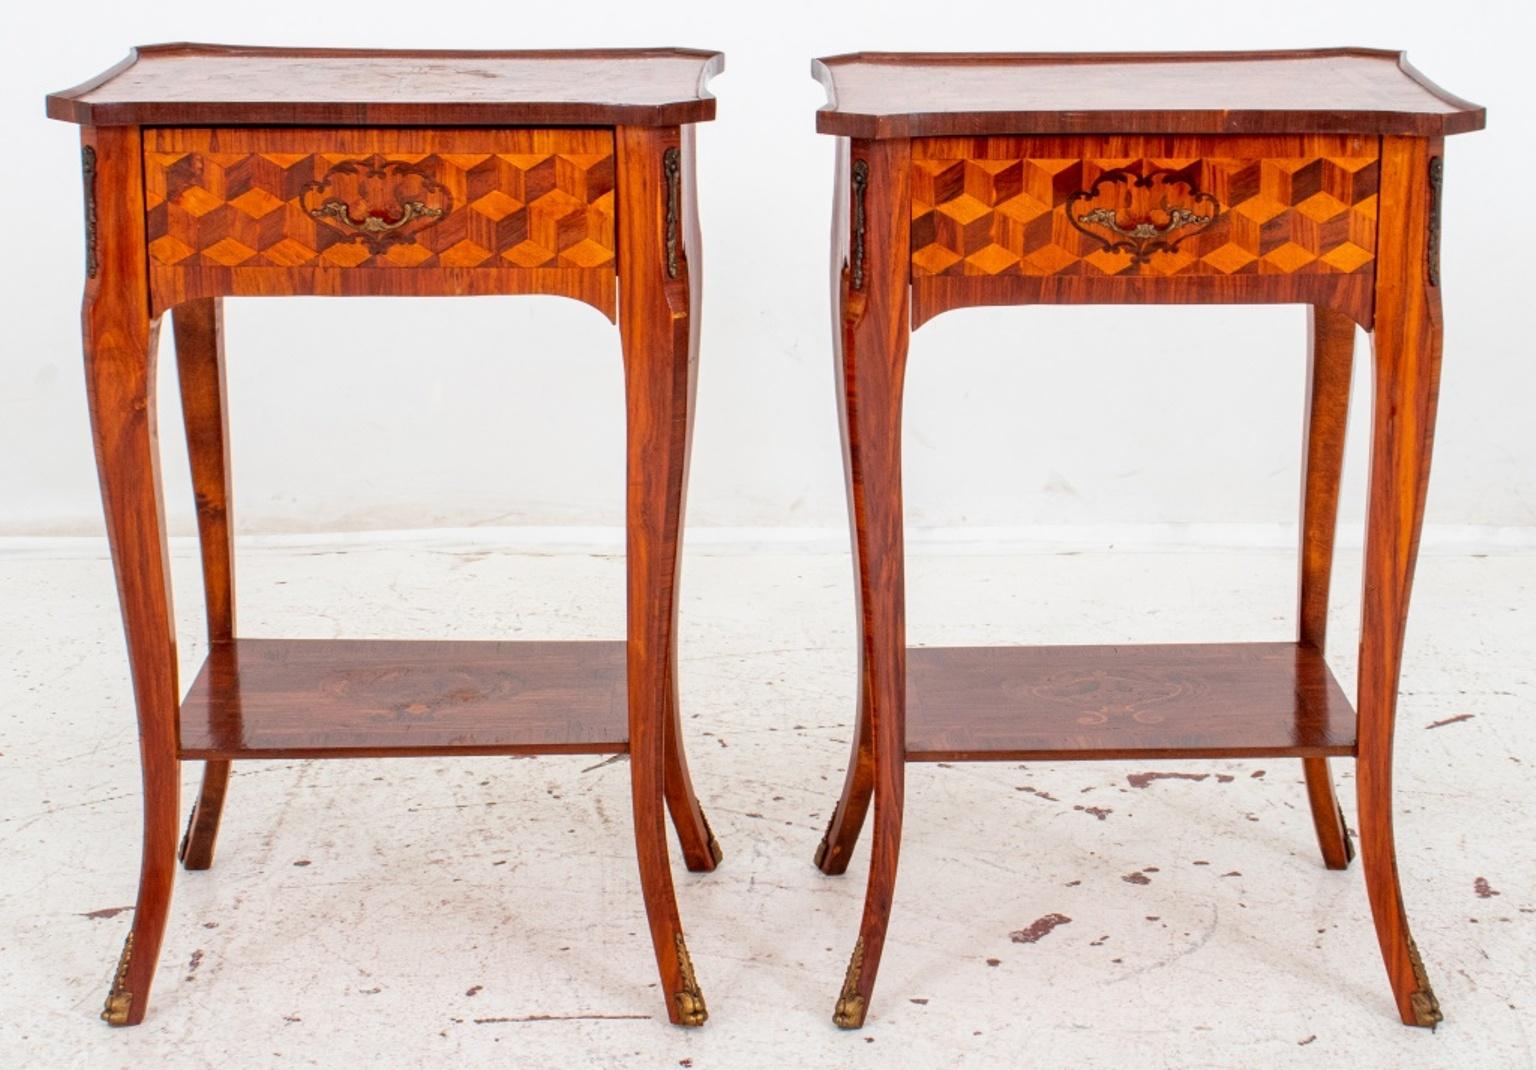 Pair of late Louis XV / early Louis XVI transitional marquetry side tables or end tables with shaped rectangular tops centering marquetry bouquets of flowers against a geometric ground above single drawers on cabriole legs conjoined by an entretoise